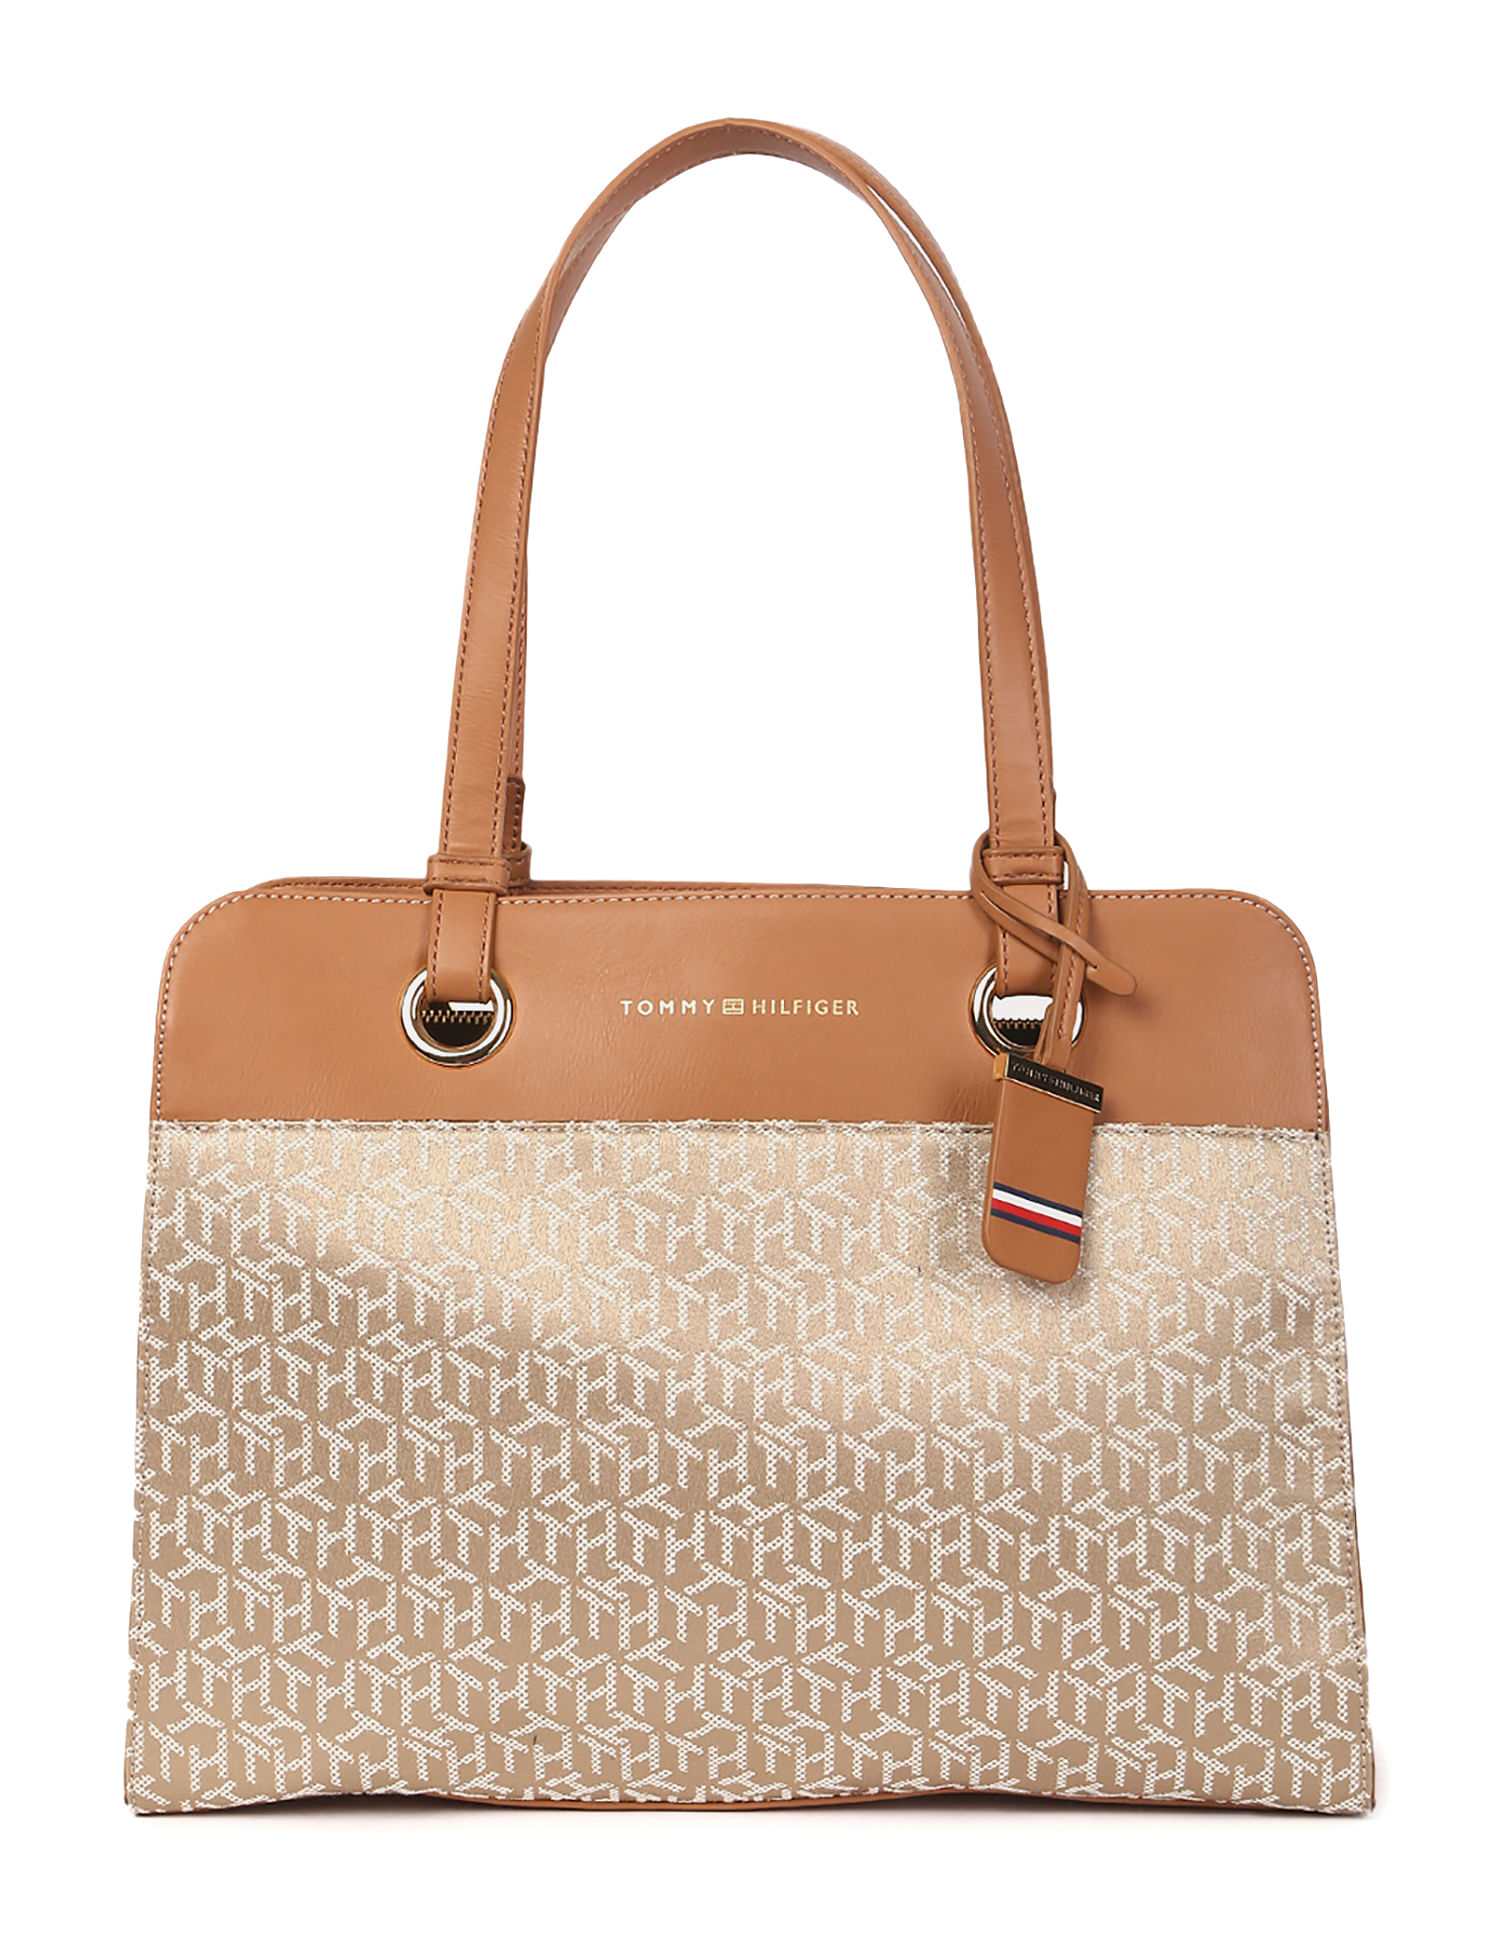 draadloos Ambacht Bedrijfsomschrijving Buy Tommy Hilfiger Claudia All Over Jacquard Monogram Tote Bag - NNNOW.com